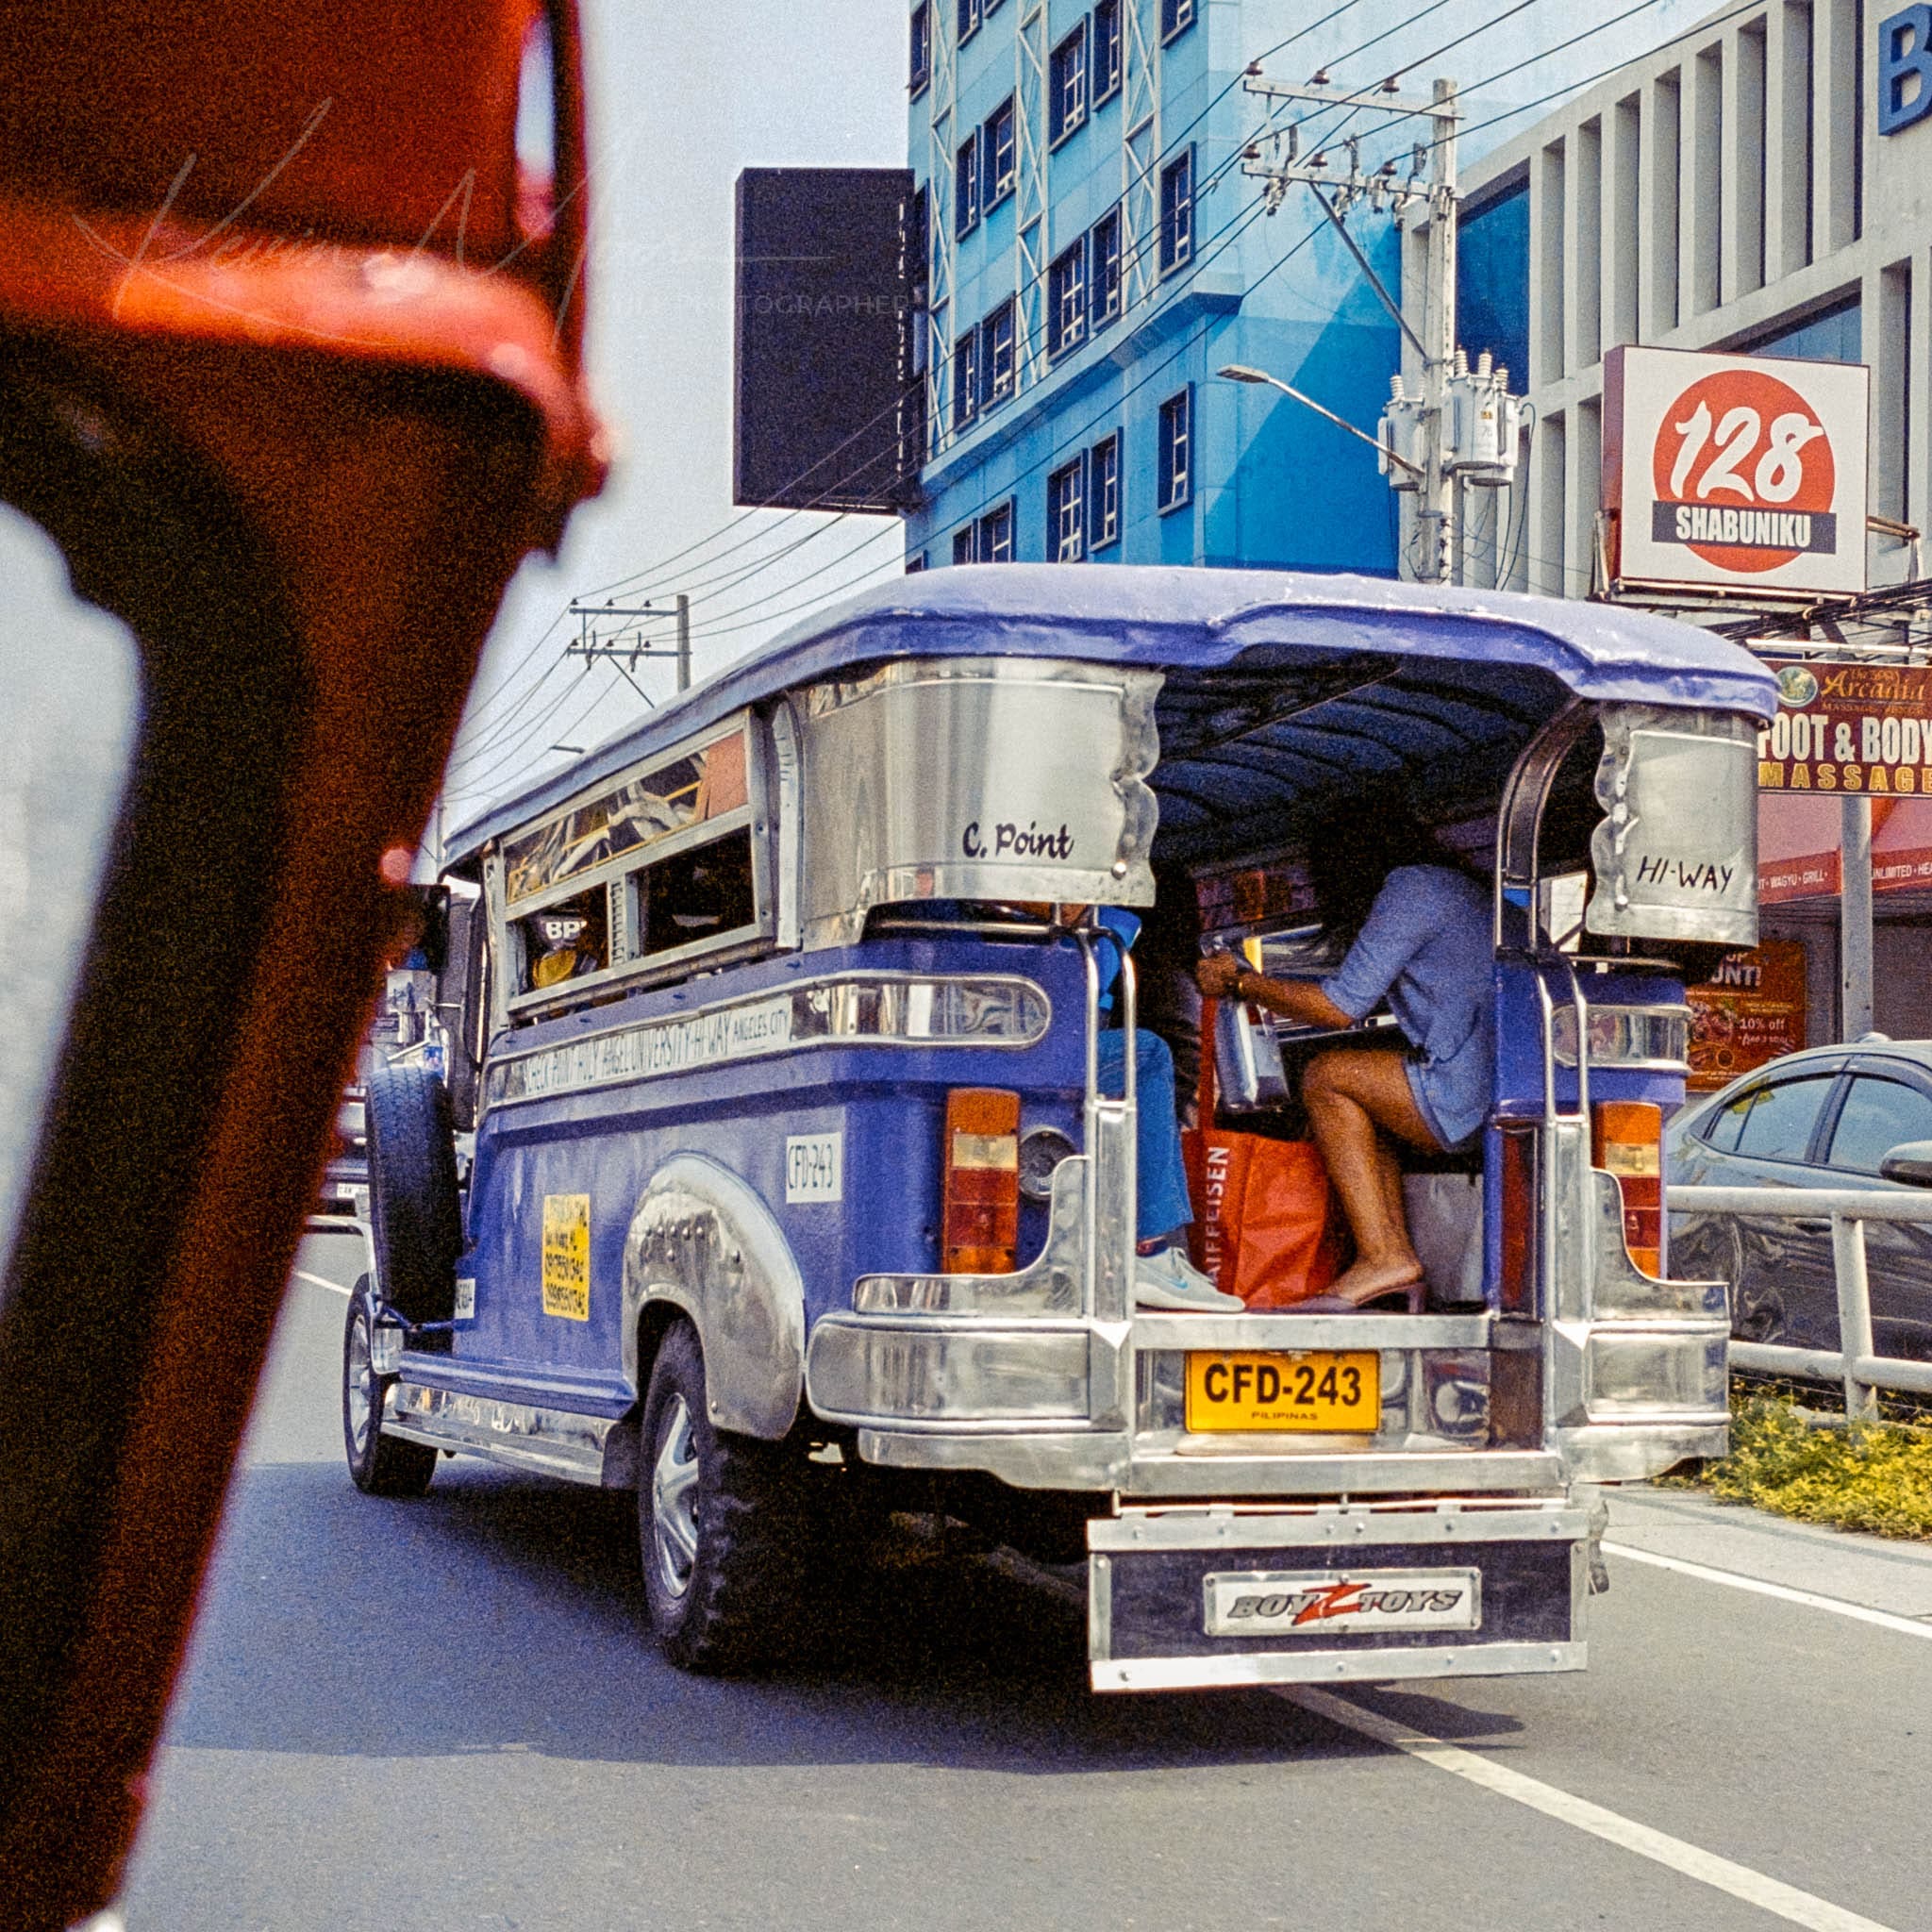 Vibrantly decorated blue jeepney navigating bustling city streets in the Philippines, with visible passenger.